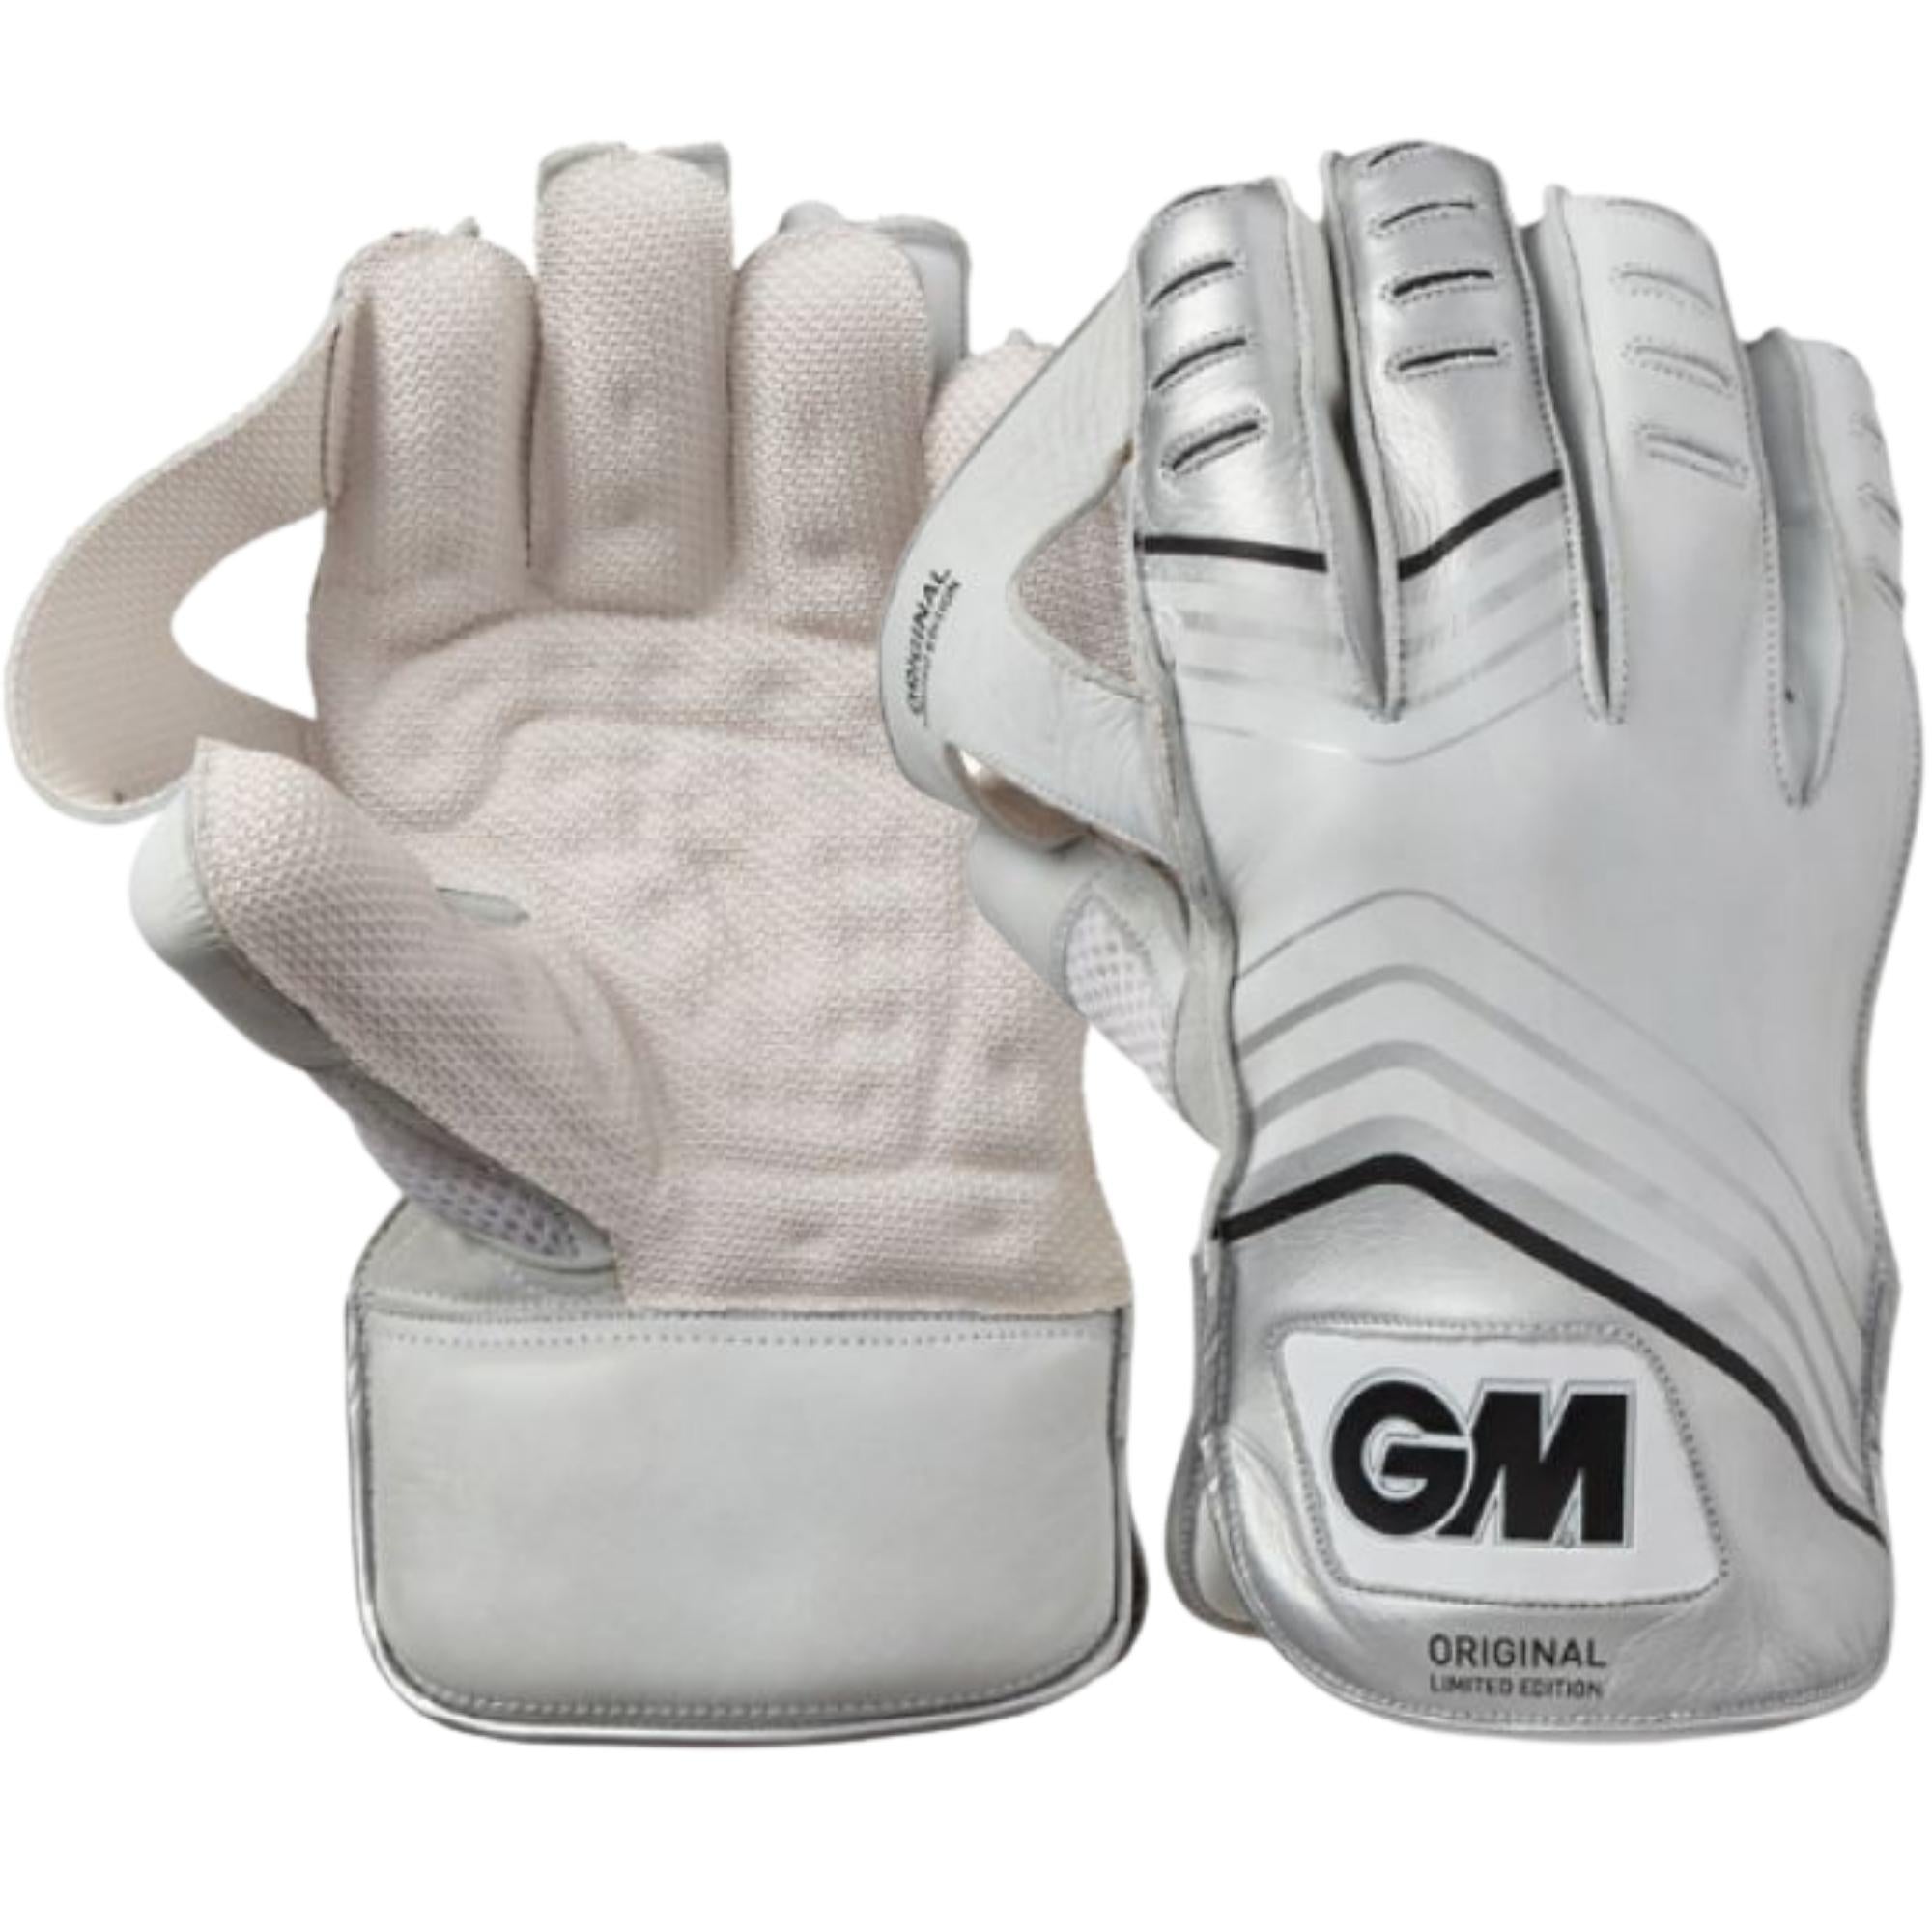 Gunn Moore Wicket Keeping Gloves Limited Edition Silver